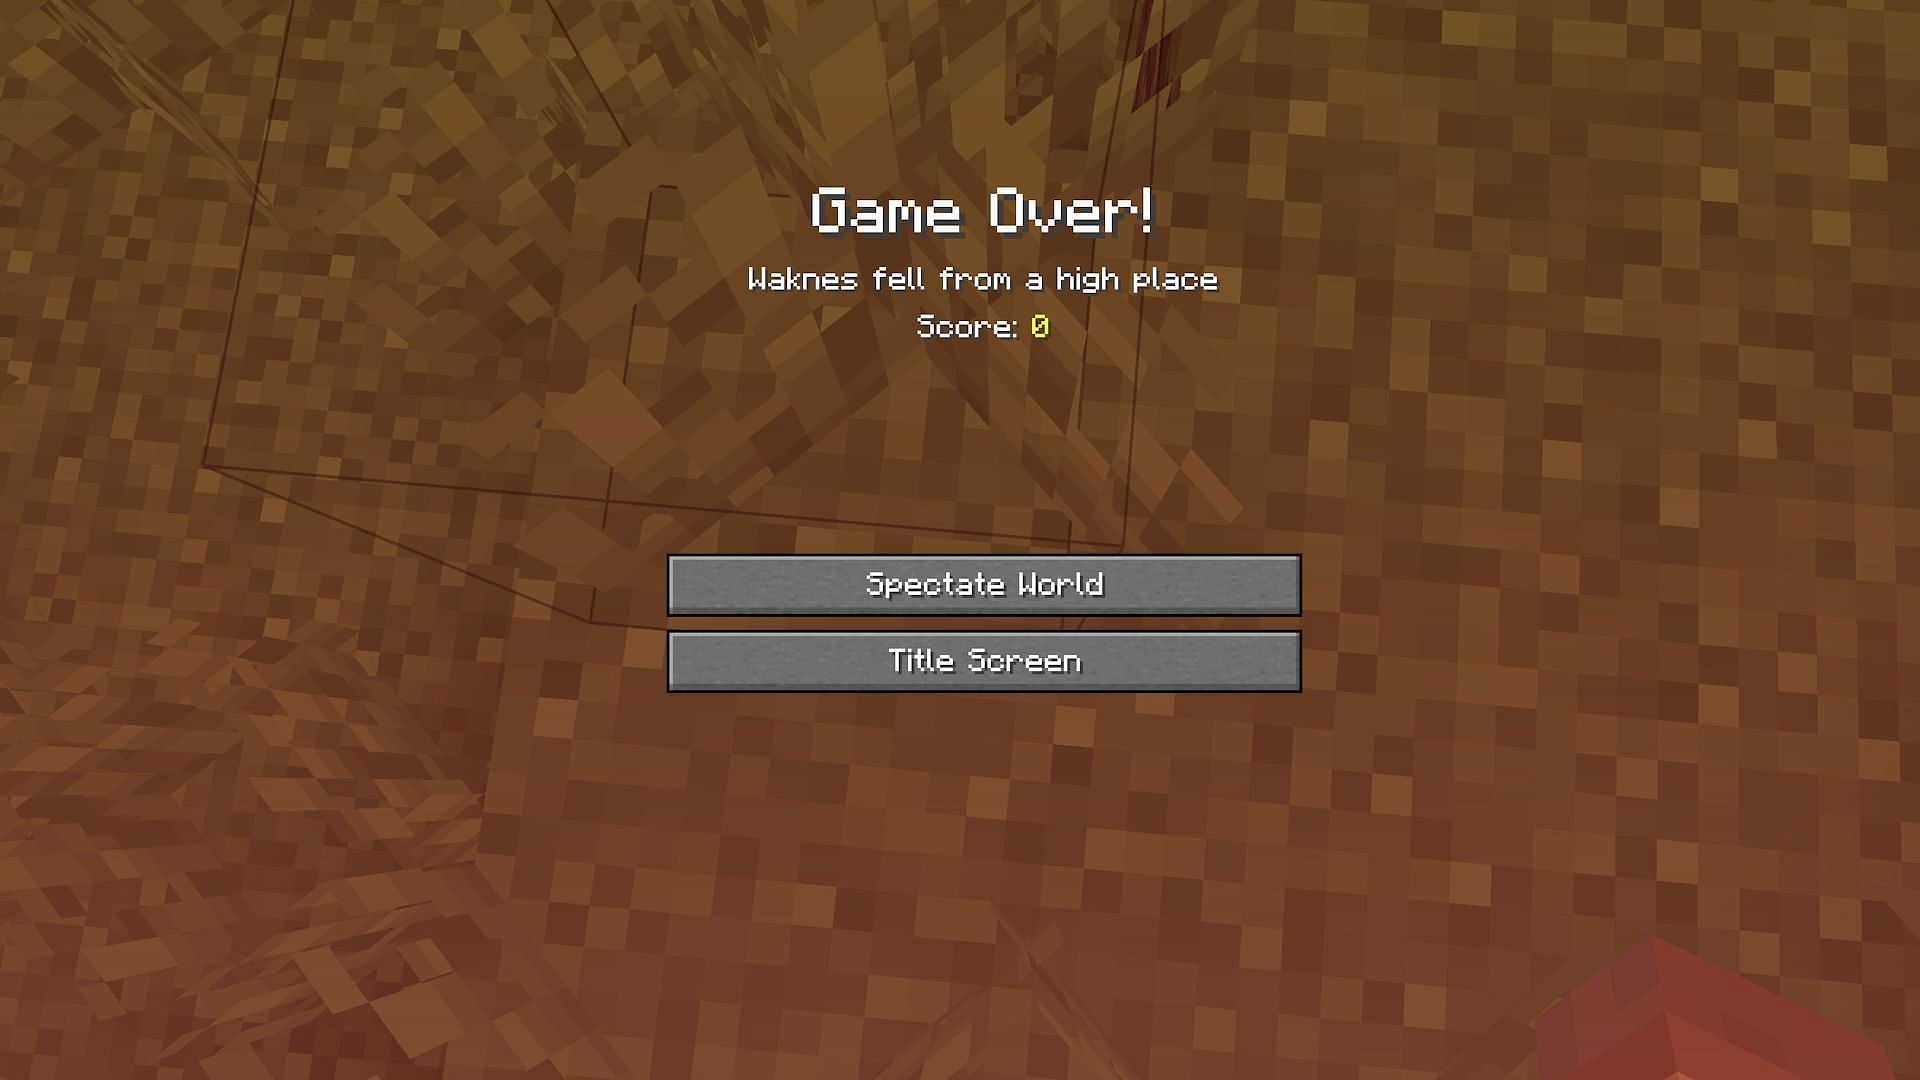 Hardcore also adds stakes to a world, as anyone who dies is gone forever (Image via Mojang)